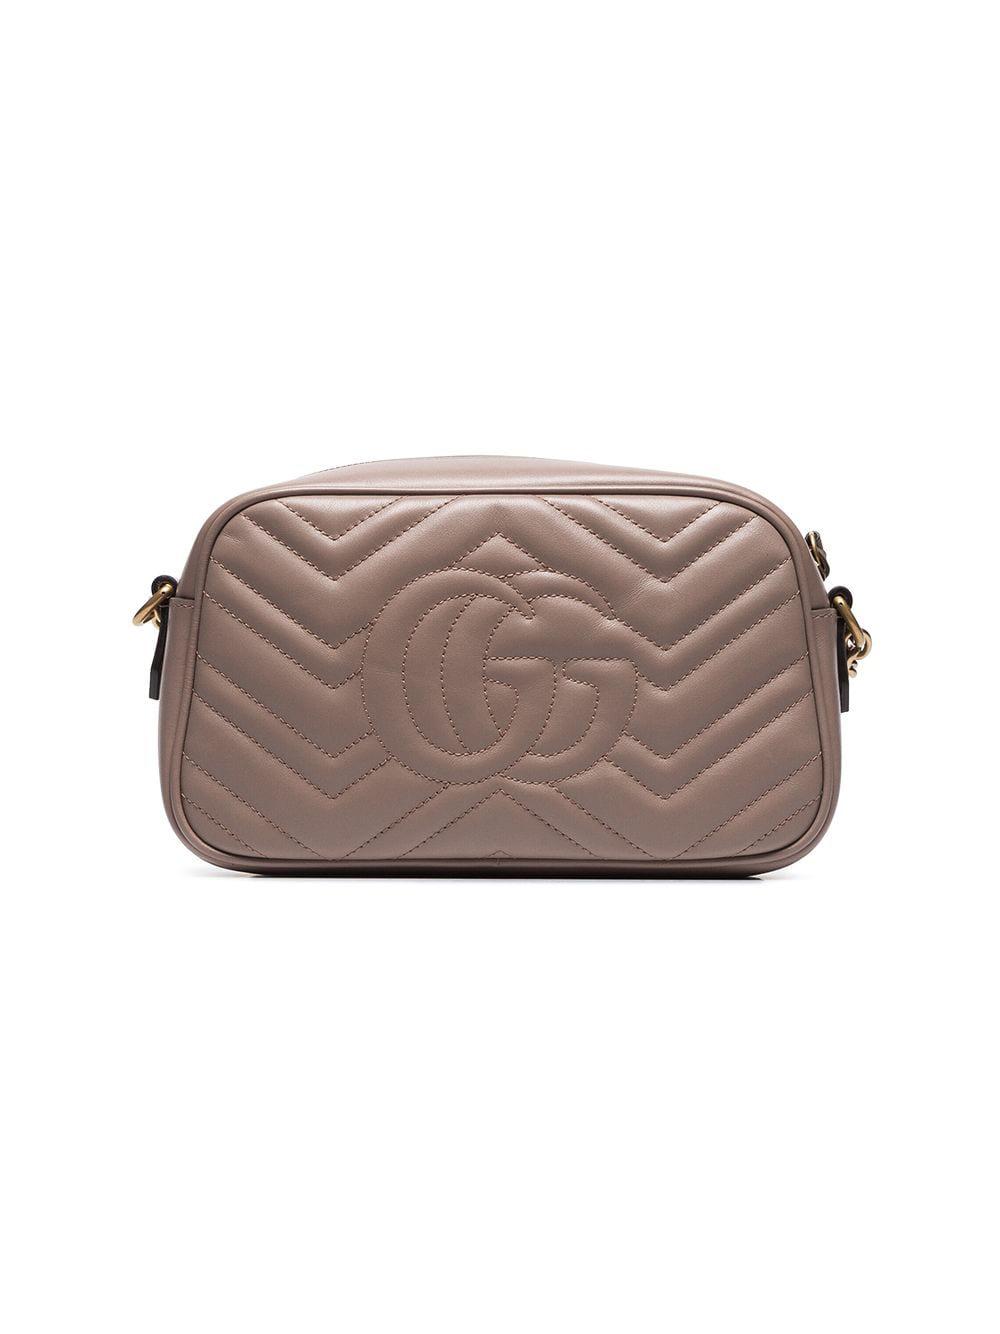 Nude GG Marmont Quilted Leather Bag - Lyst